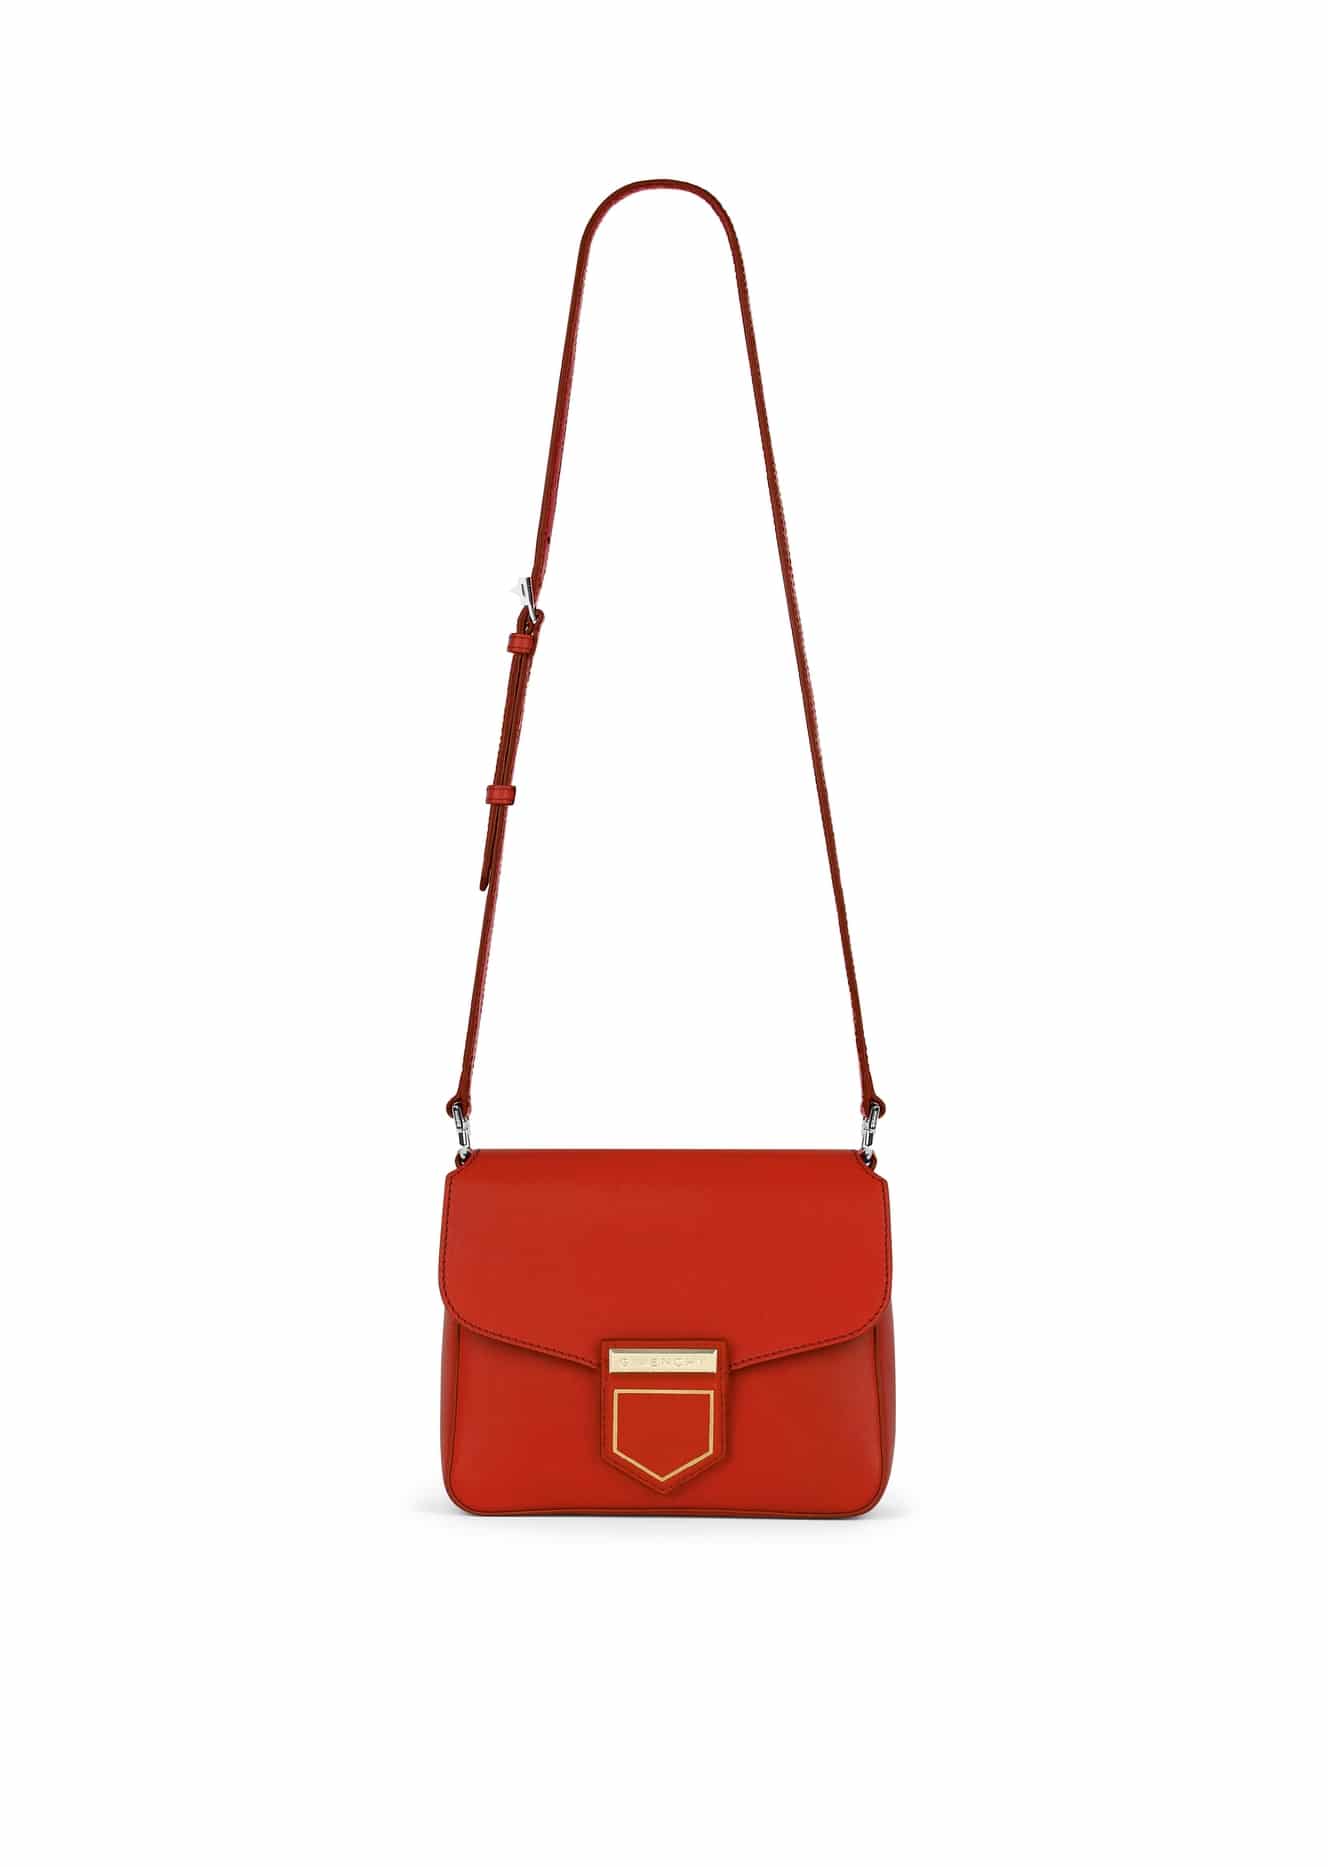 Givenchy Bag Price List Reference Guide – Spotted Fashion